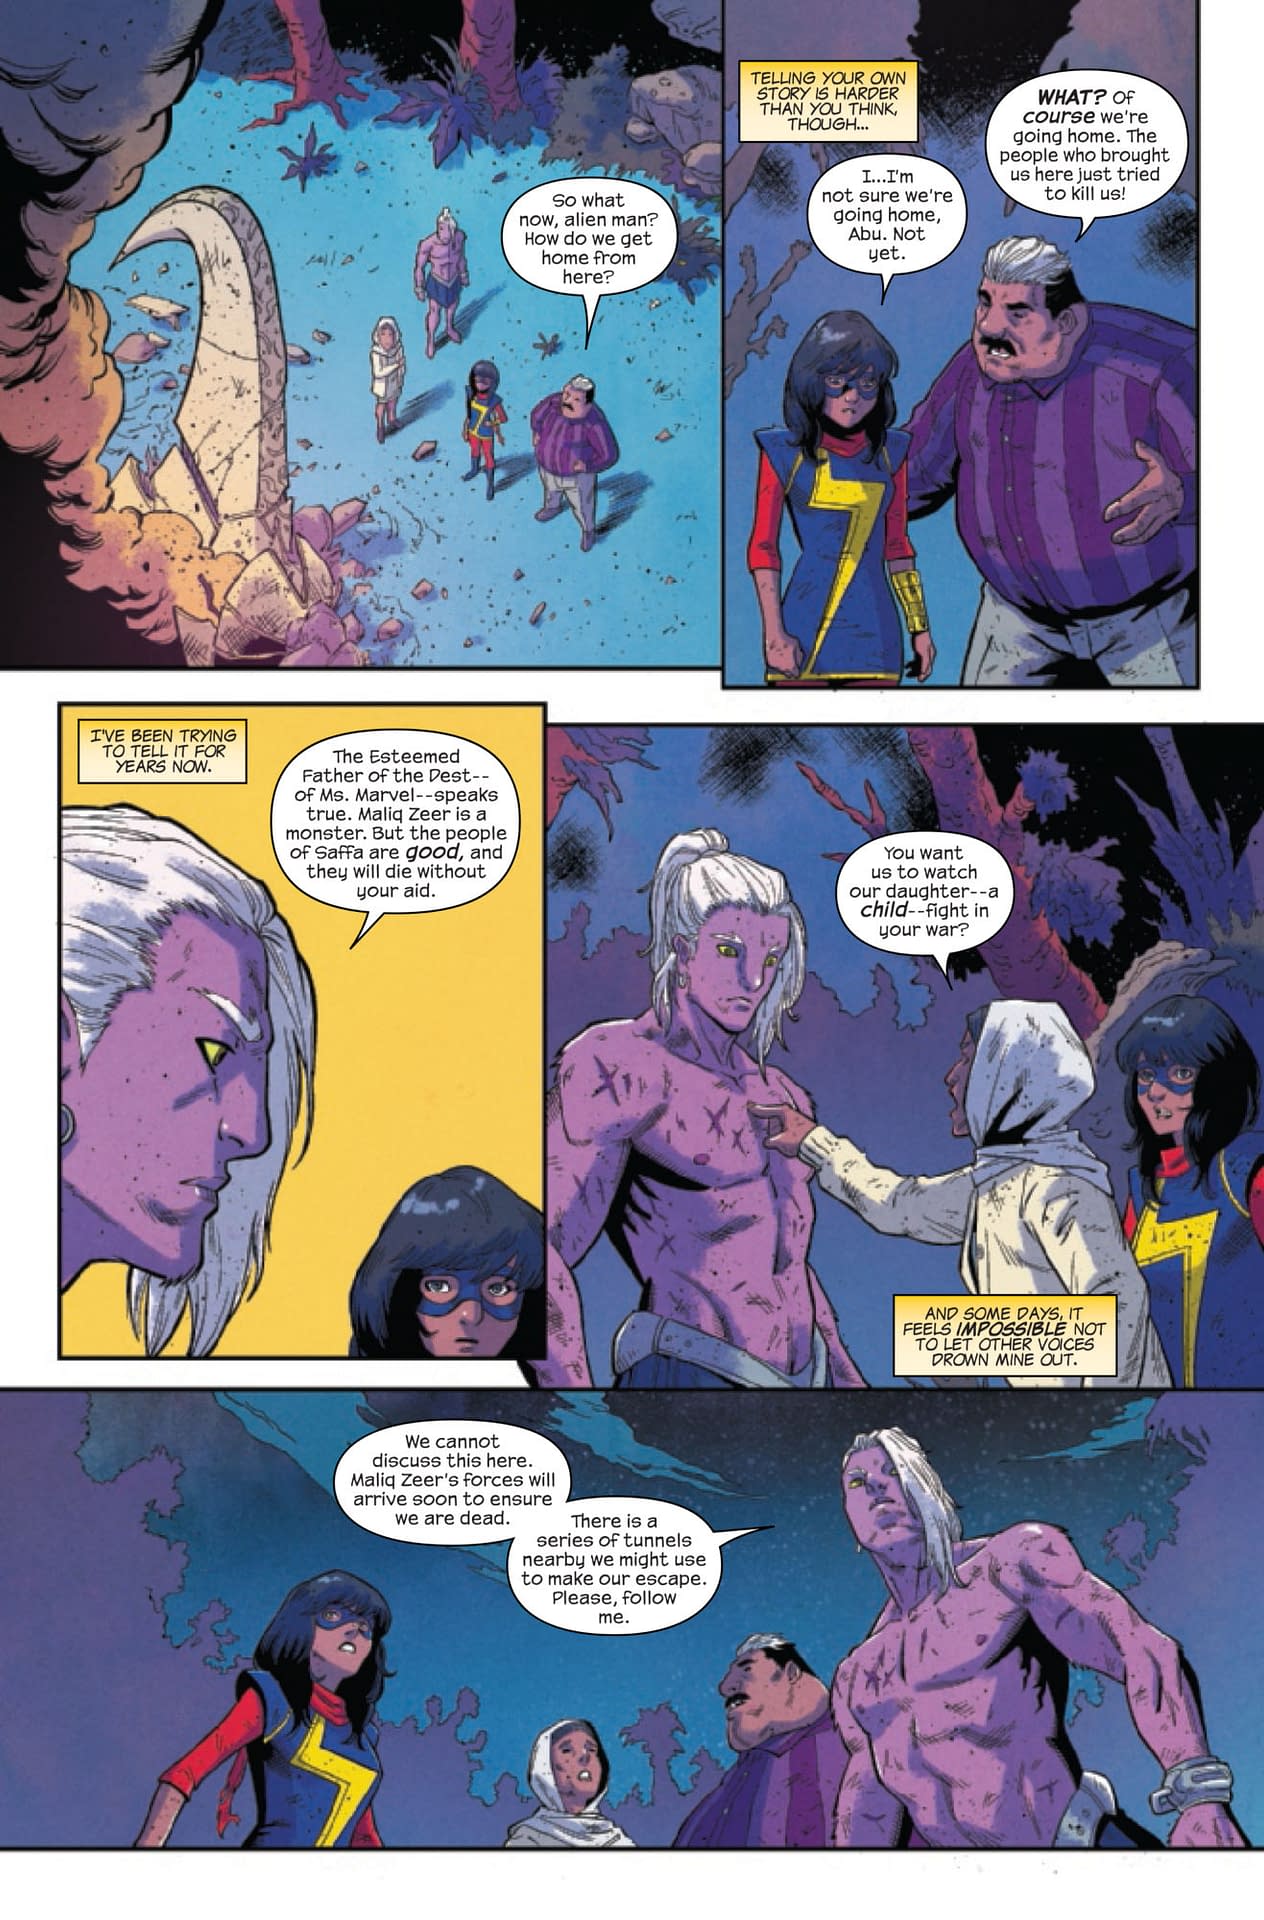 Parents Just Don't Understand in Magnificent Ms. Marvel #4 (Preview)